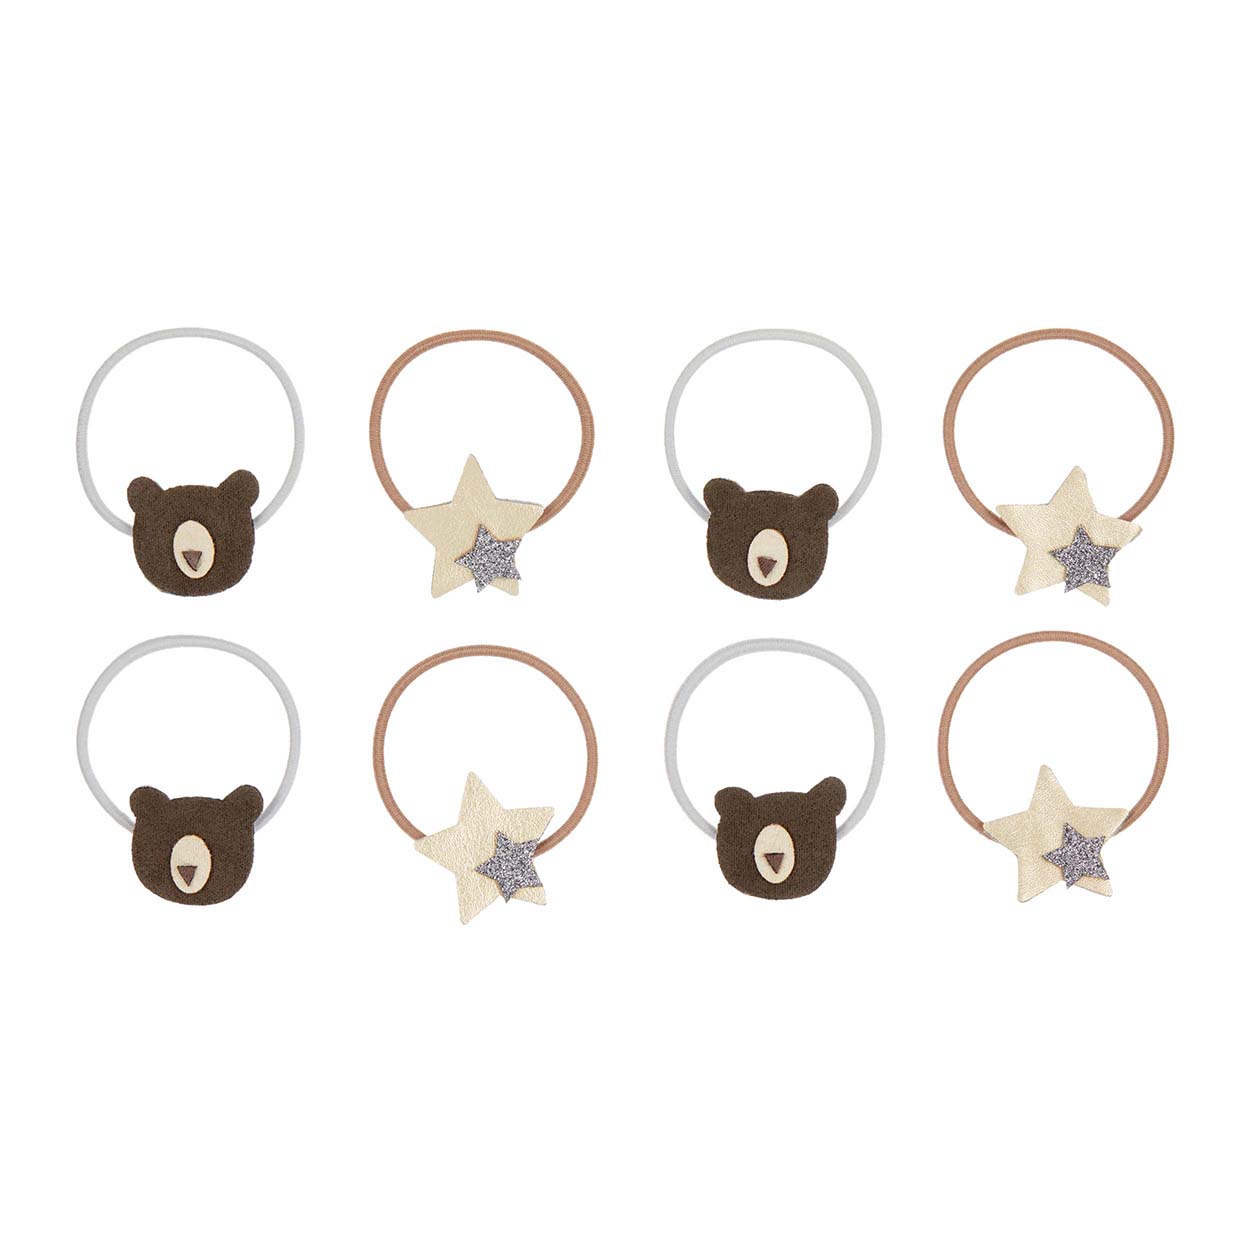 Grizzly Bear Hair Ties 4 Pack